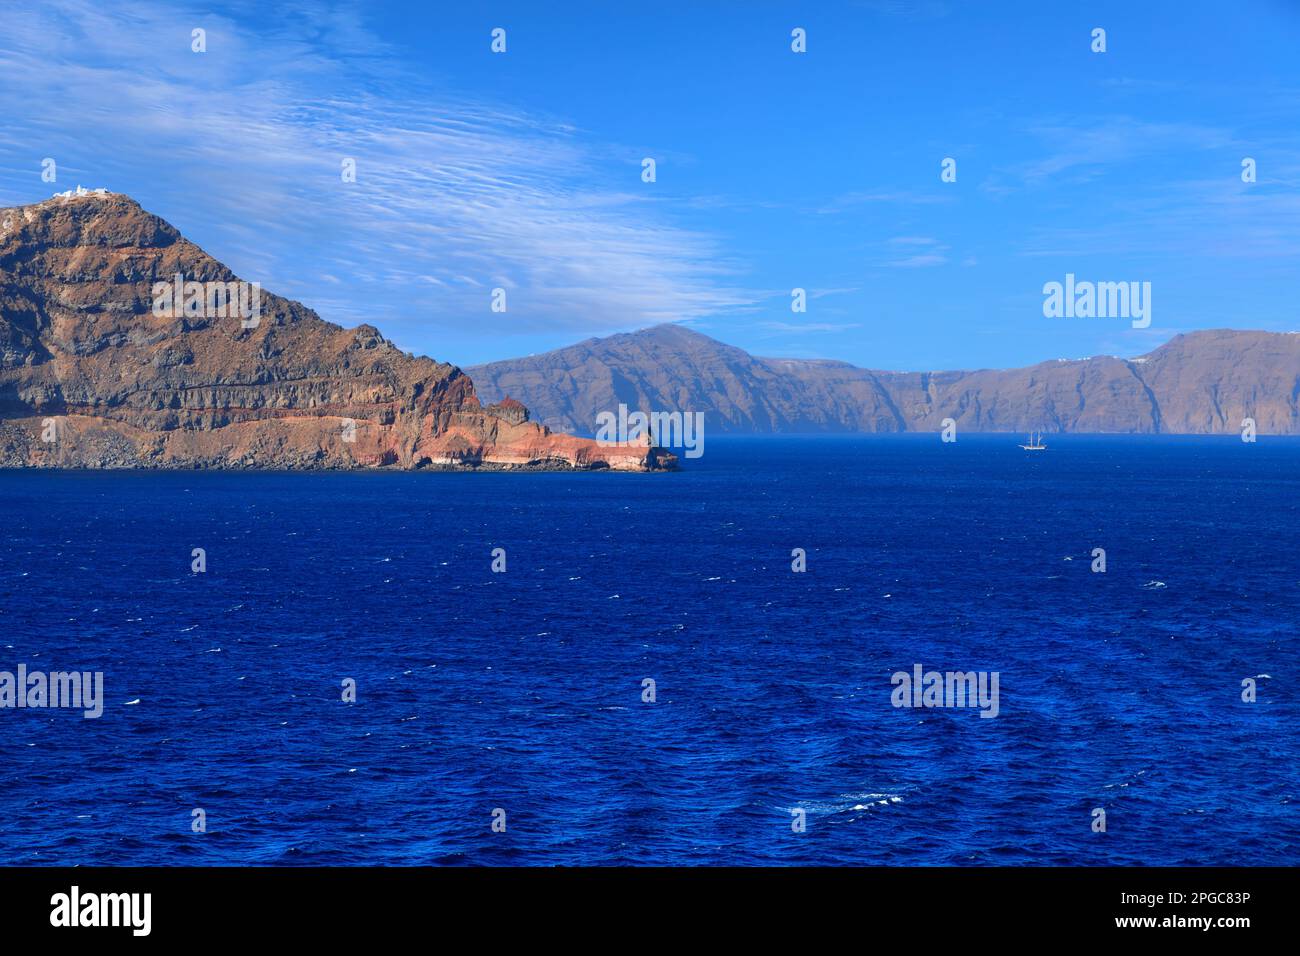 Typical coast of Santorini, member of the Cyclades group of islands in Greece. Stock Photo